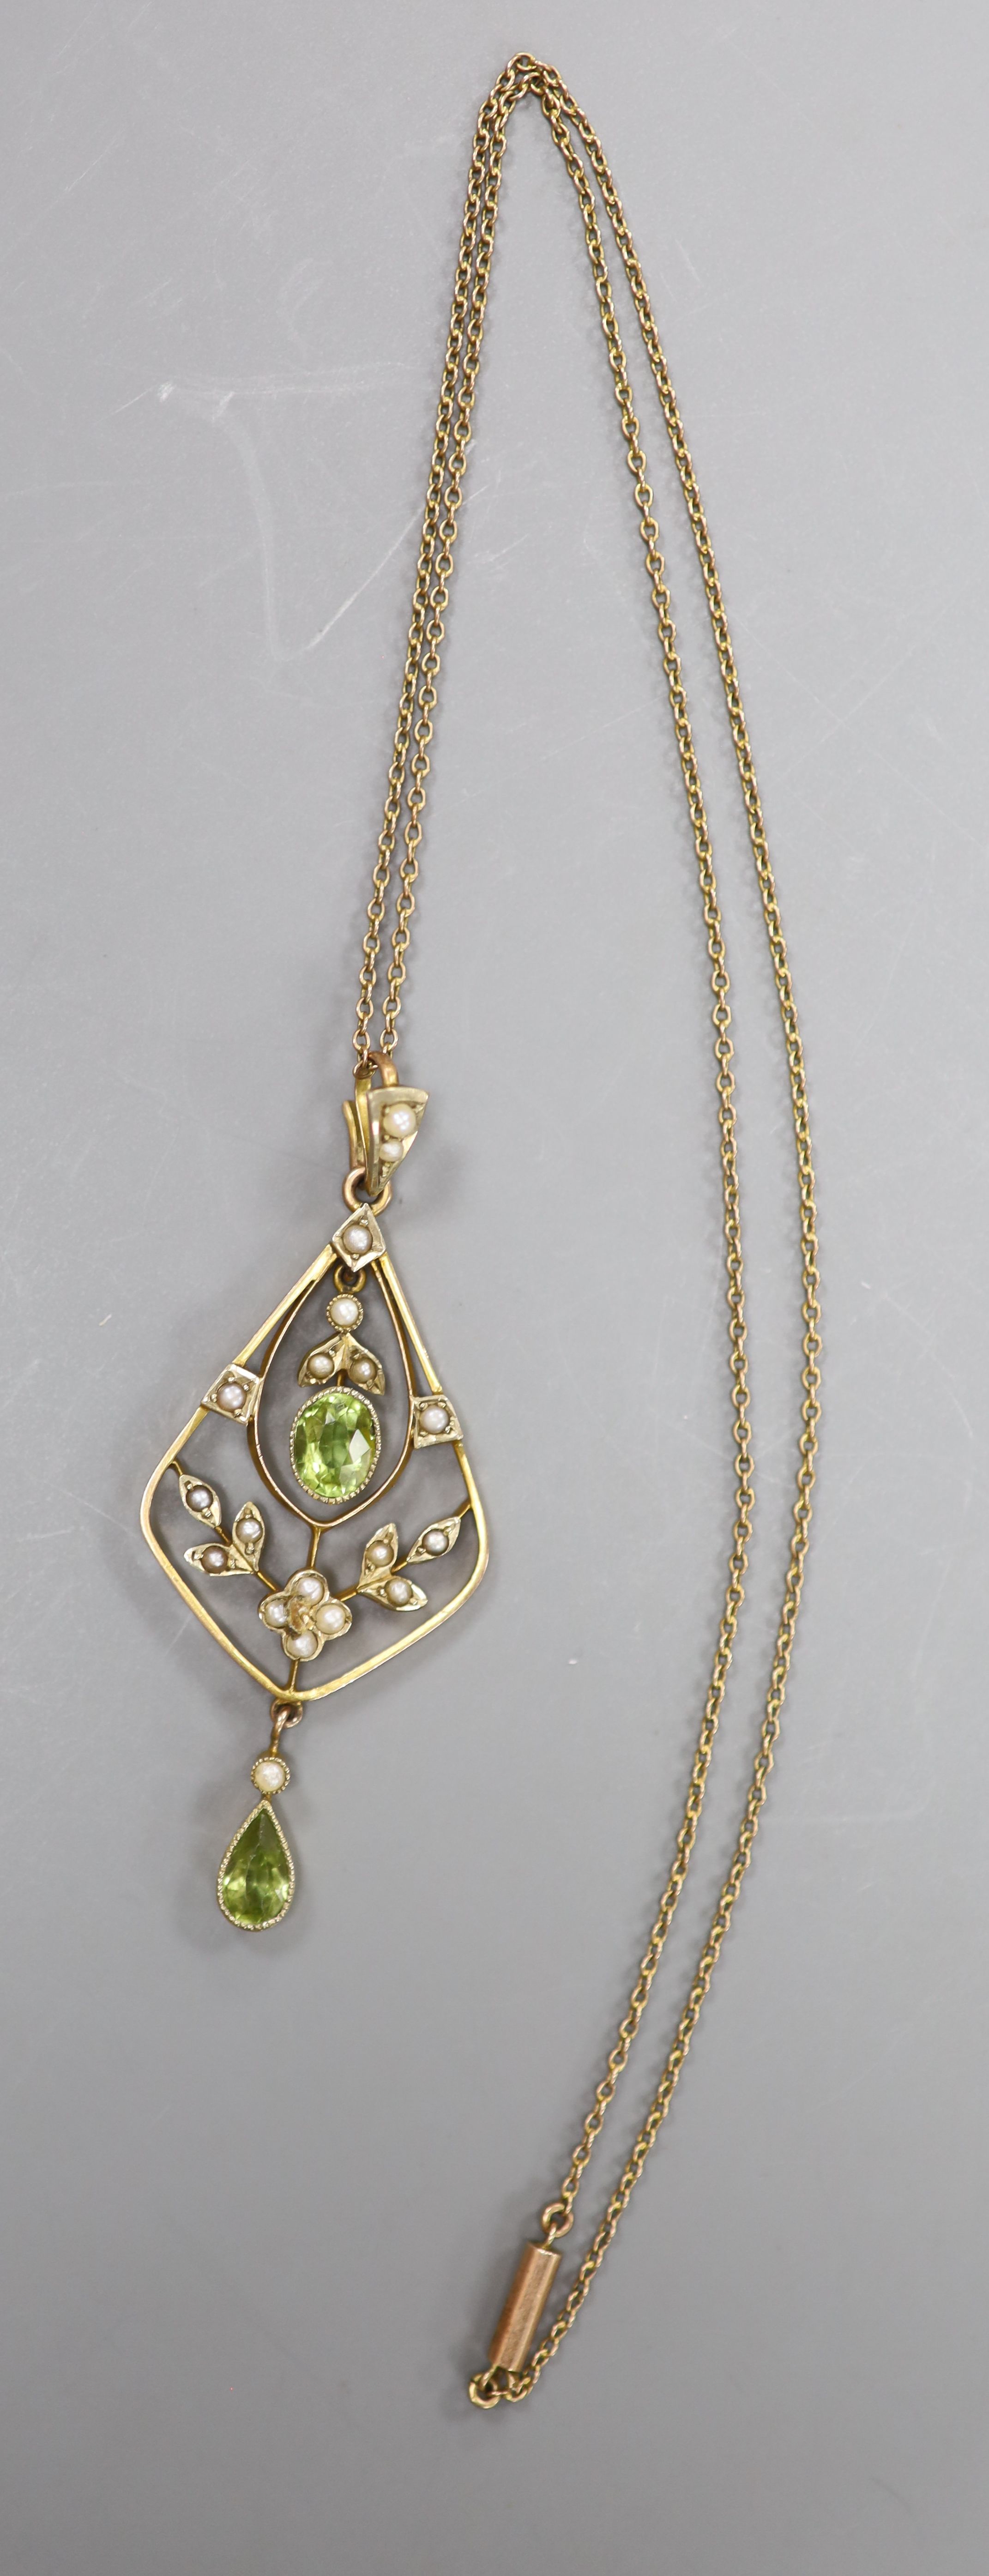 An early 20th century 9ct, peridot and seed pearl set drop pendant, 54mm, on a fine link yellow metal chain, 42cm